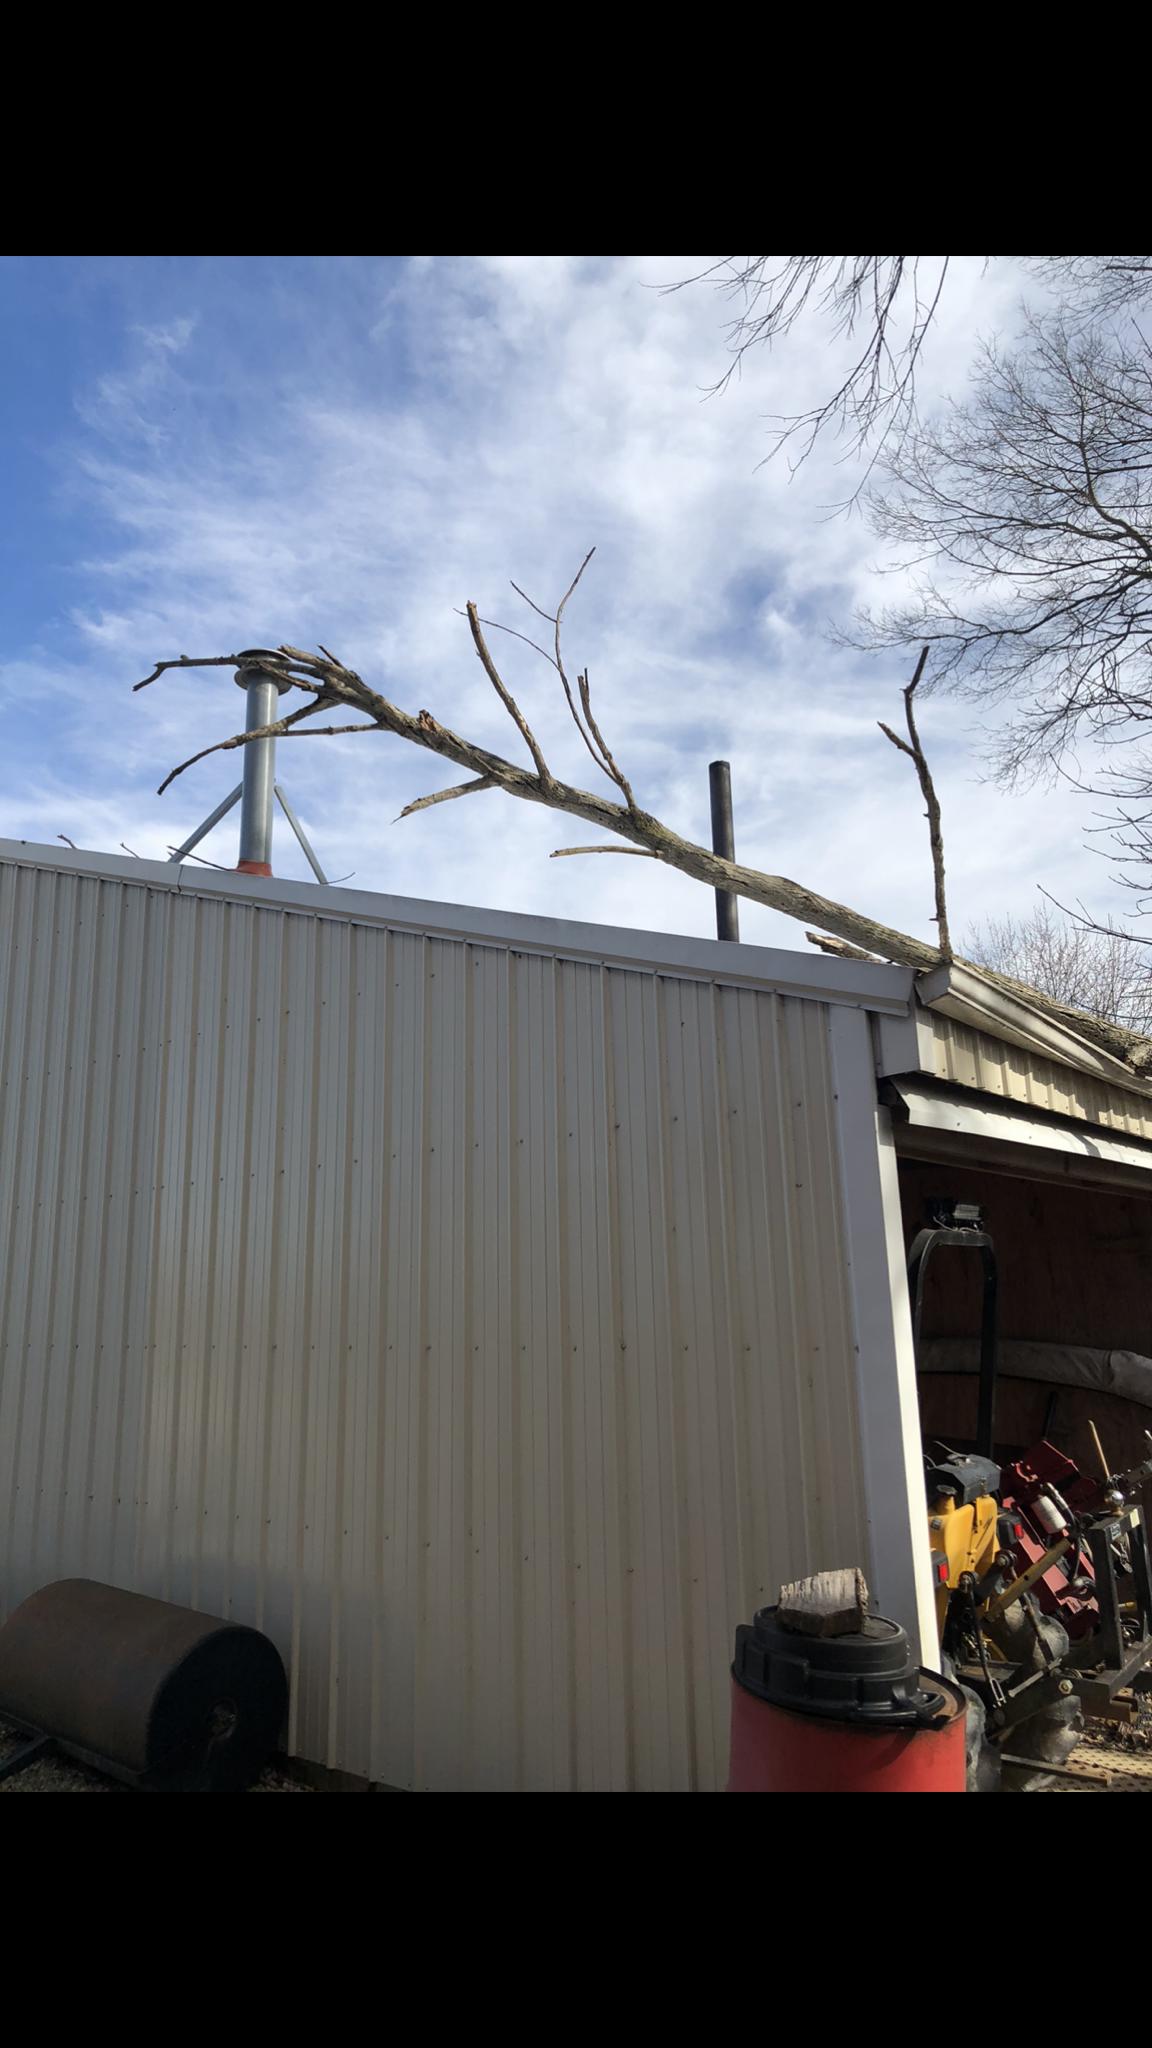 The wind become once so rotten a tree fell on my dads shop outback